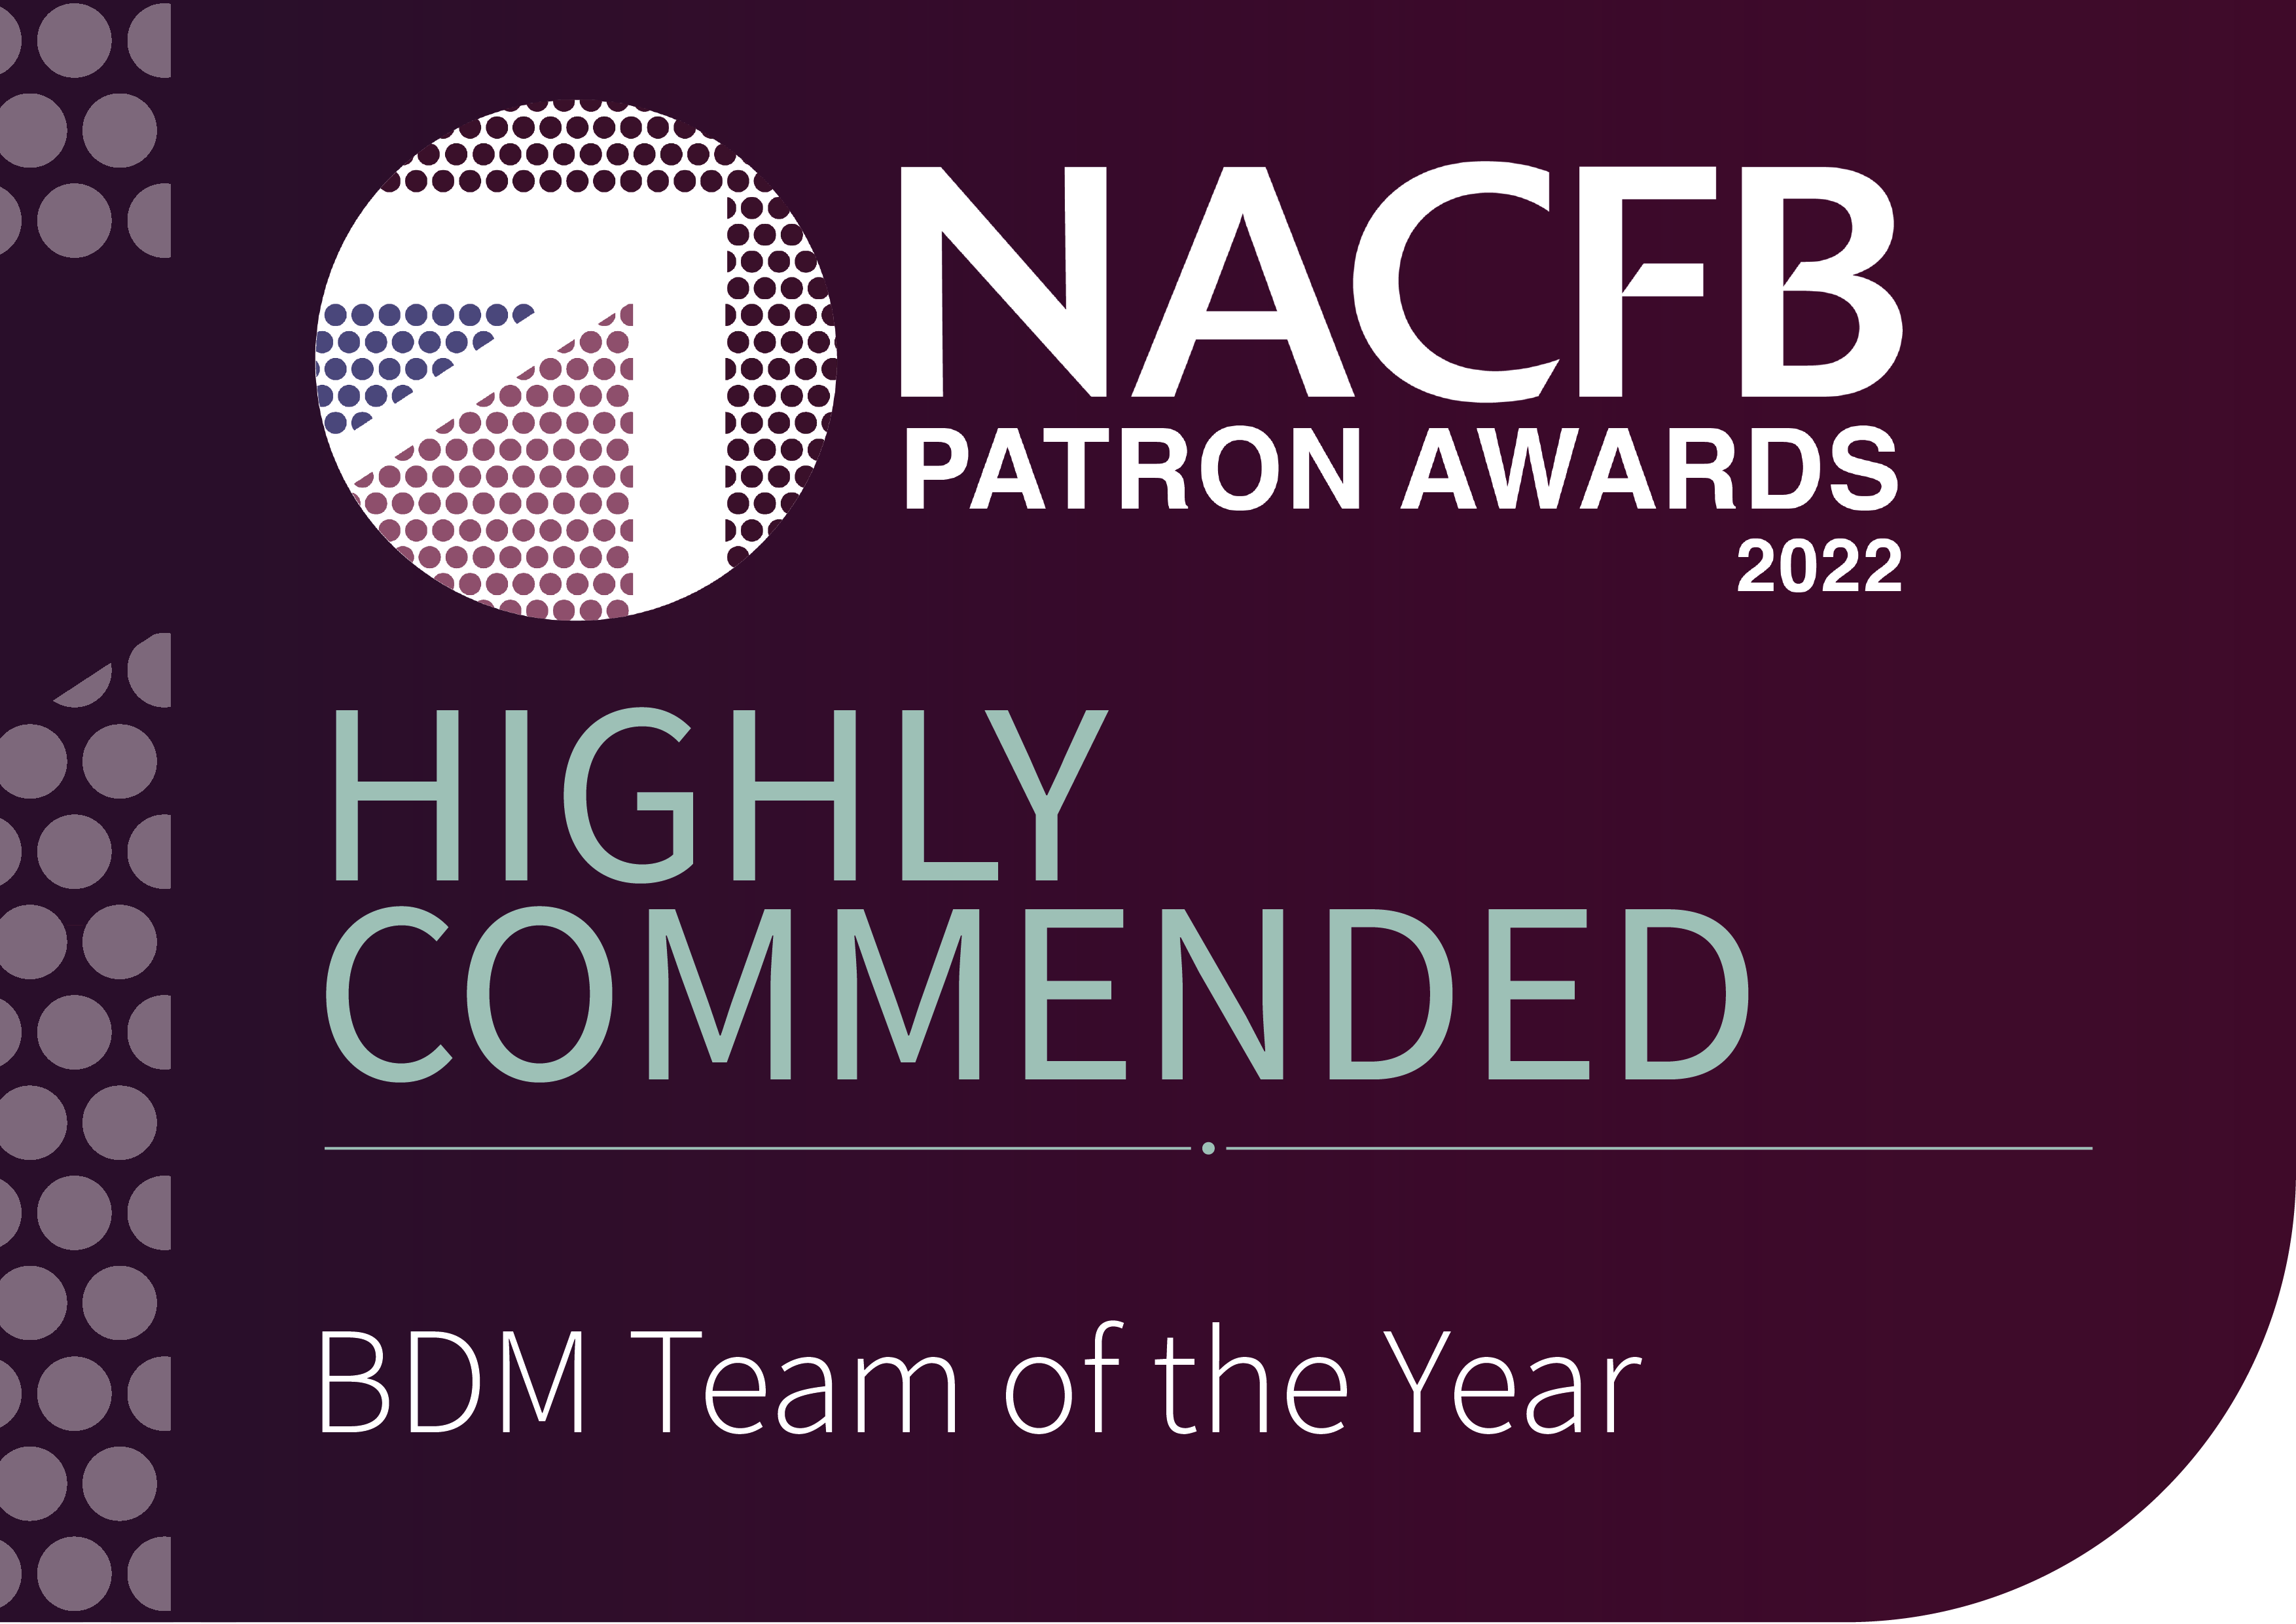 Patron Awards Highly Commended BDM Team of the Year